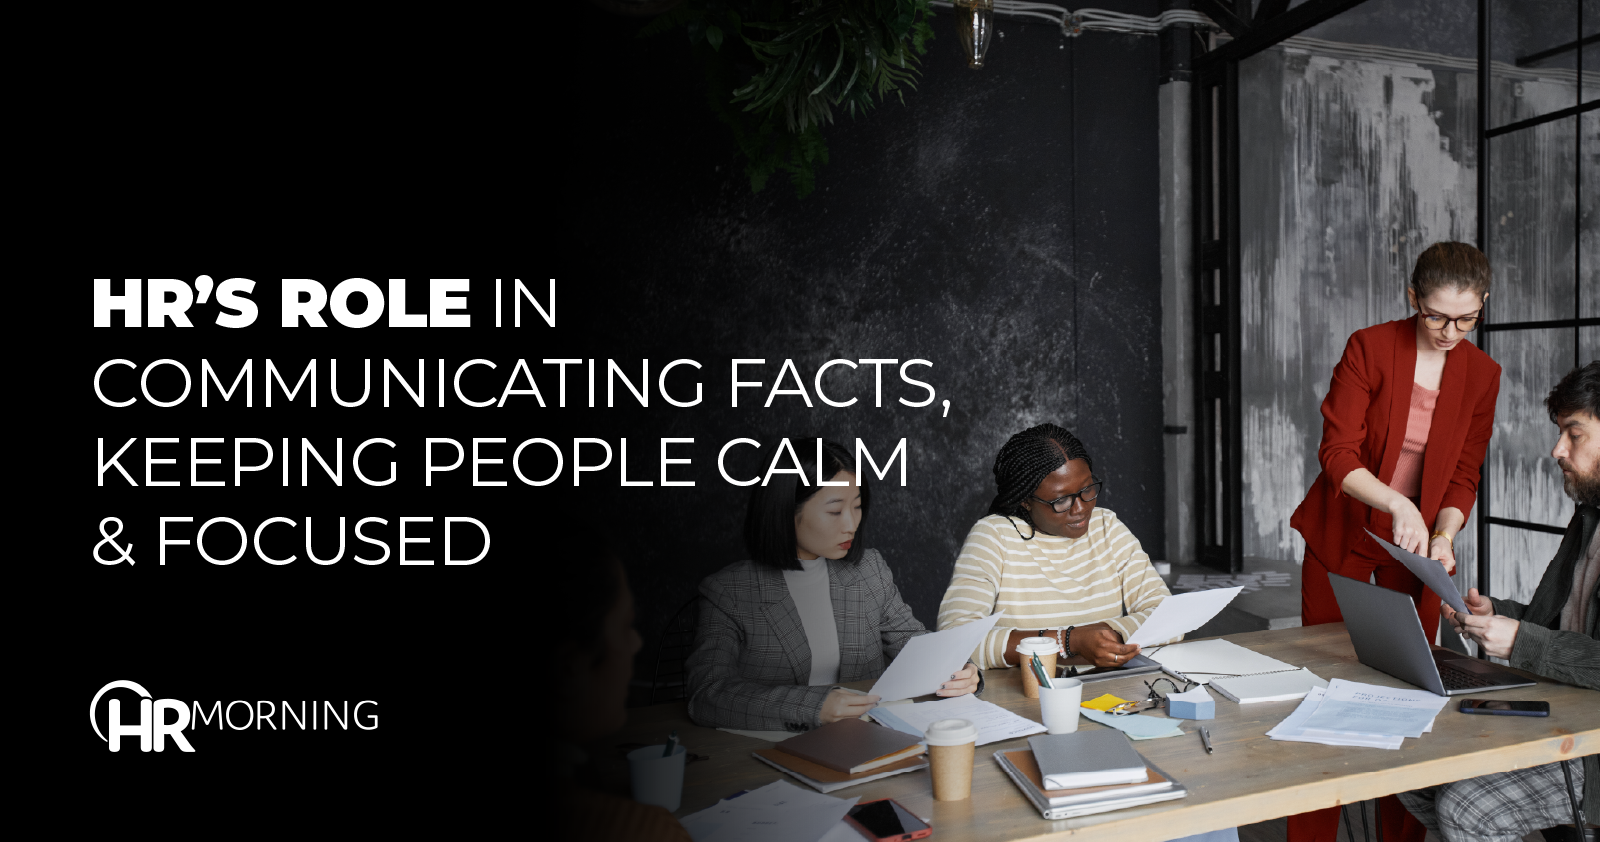 HR's RoleI n Communicating Facts Keeping People Calm And Focused